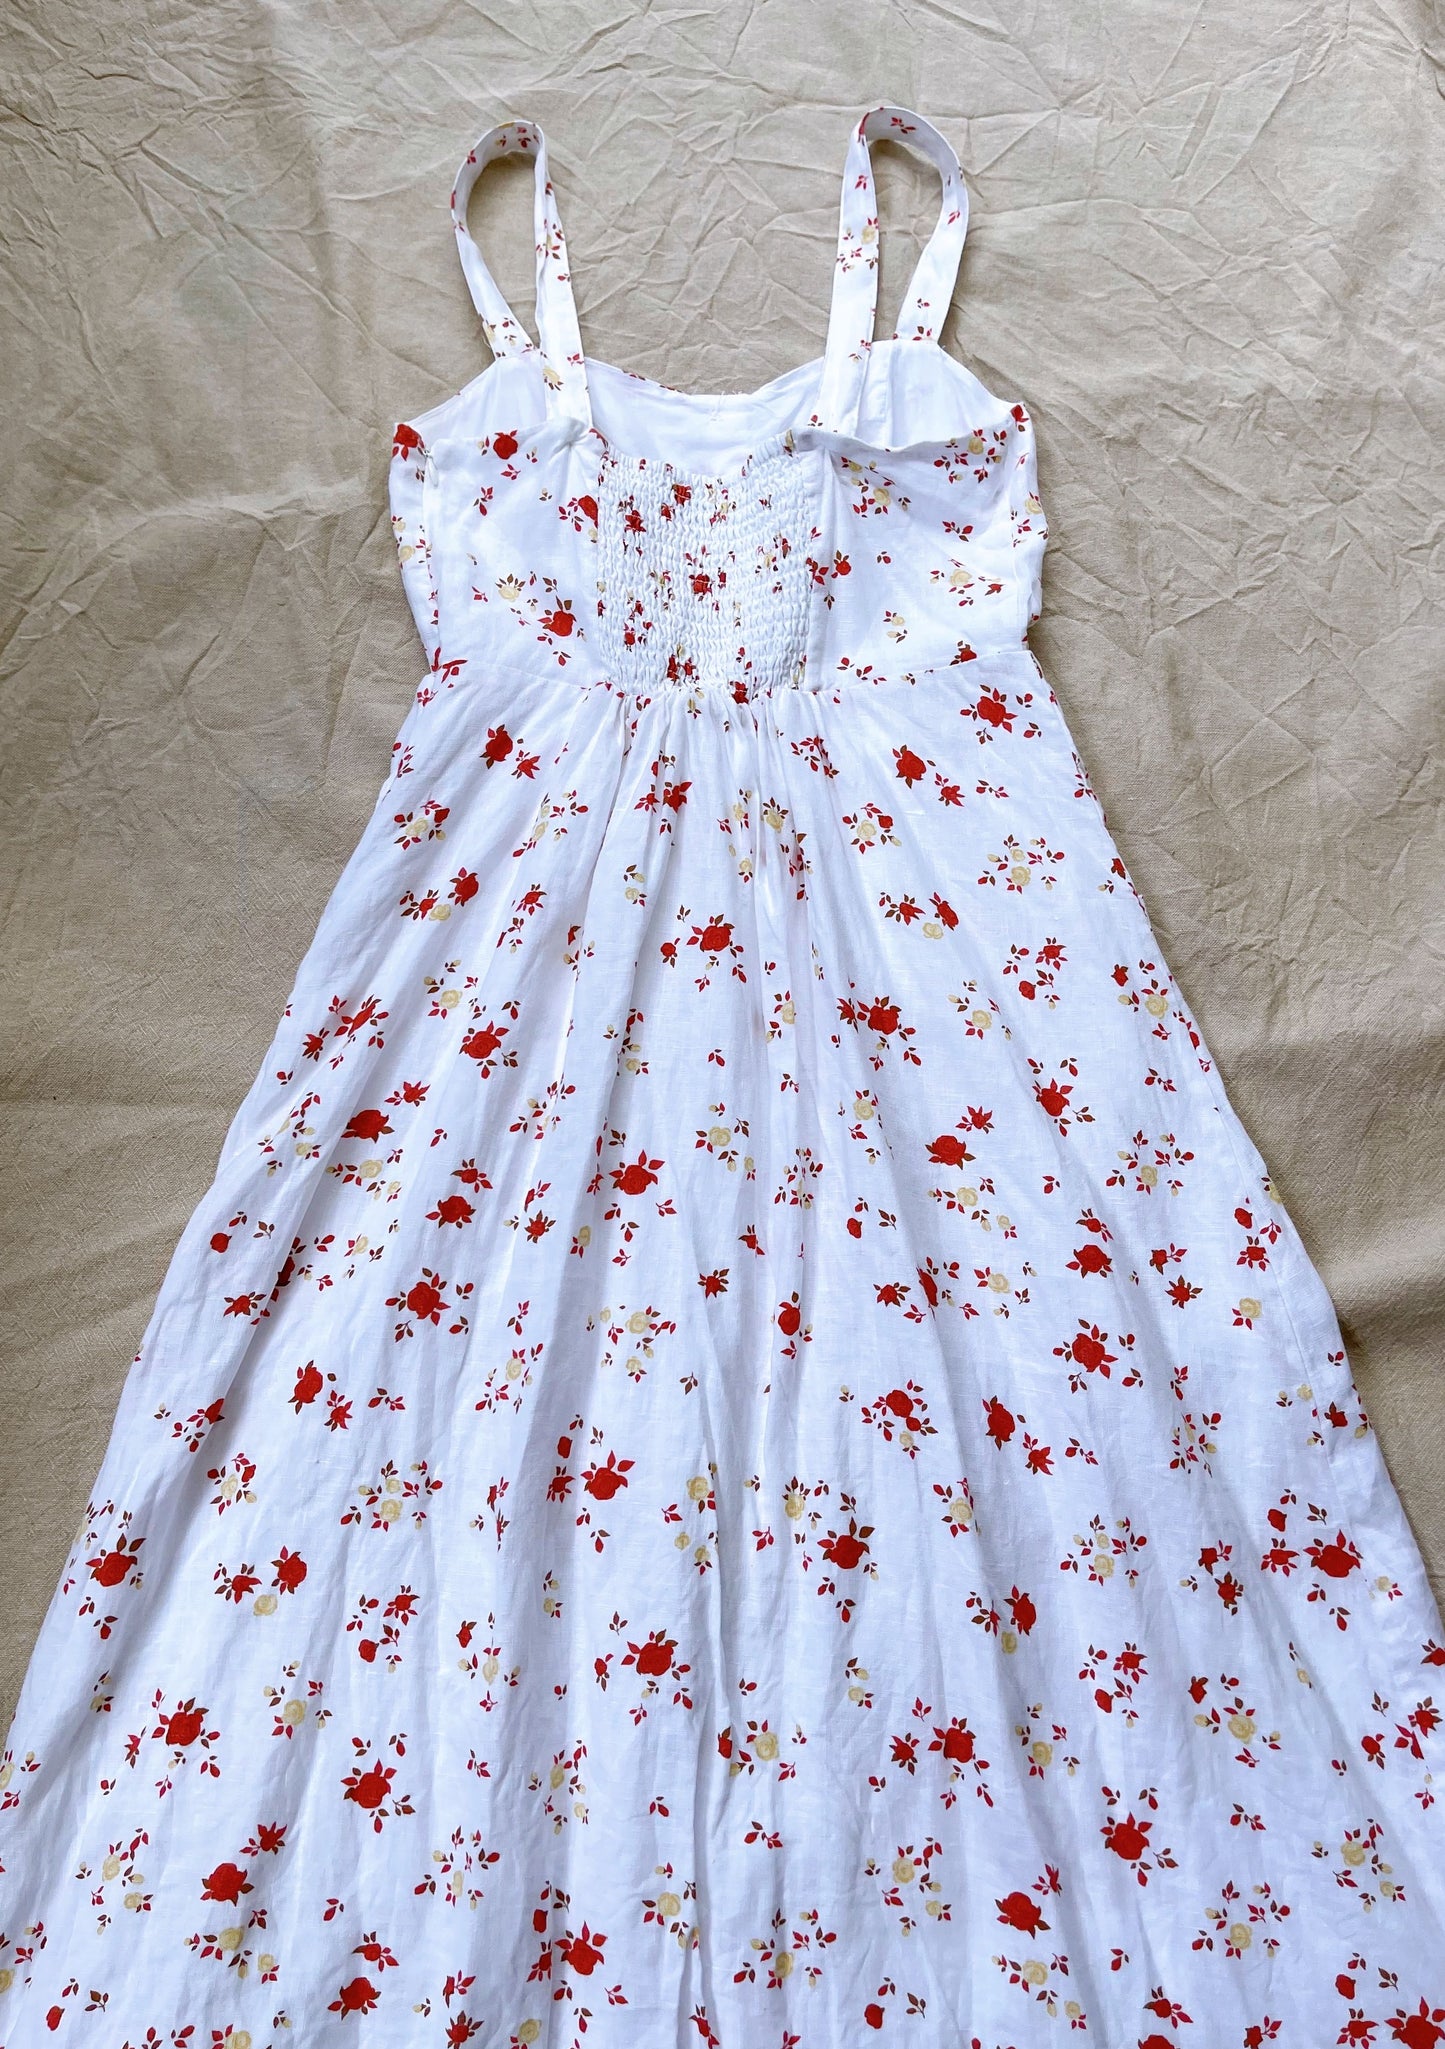 FRENCH CONNECTION FLORAL DRESS